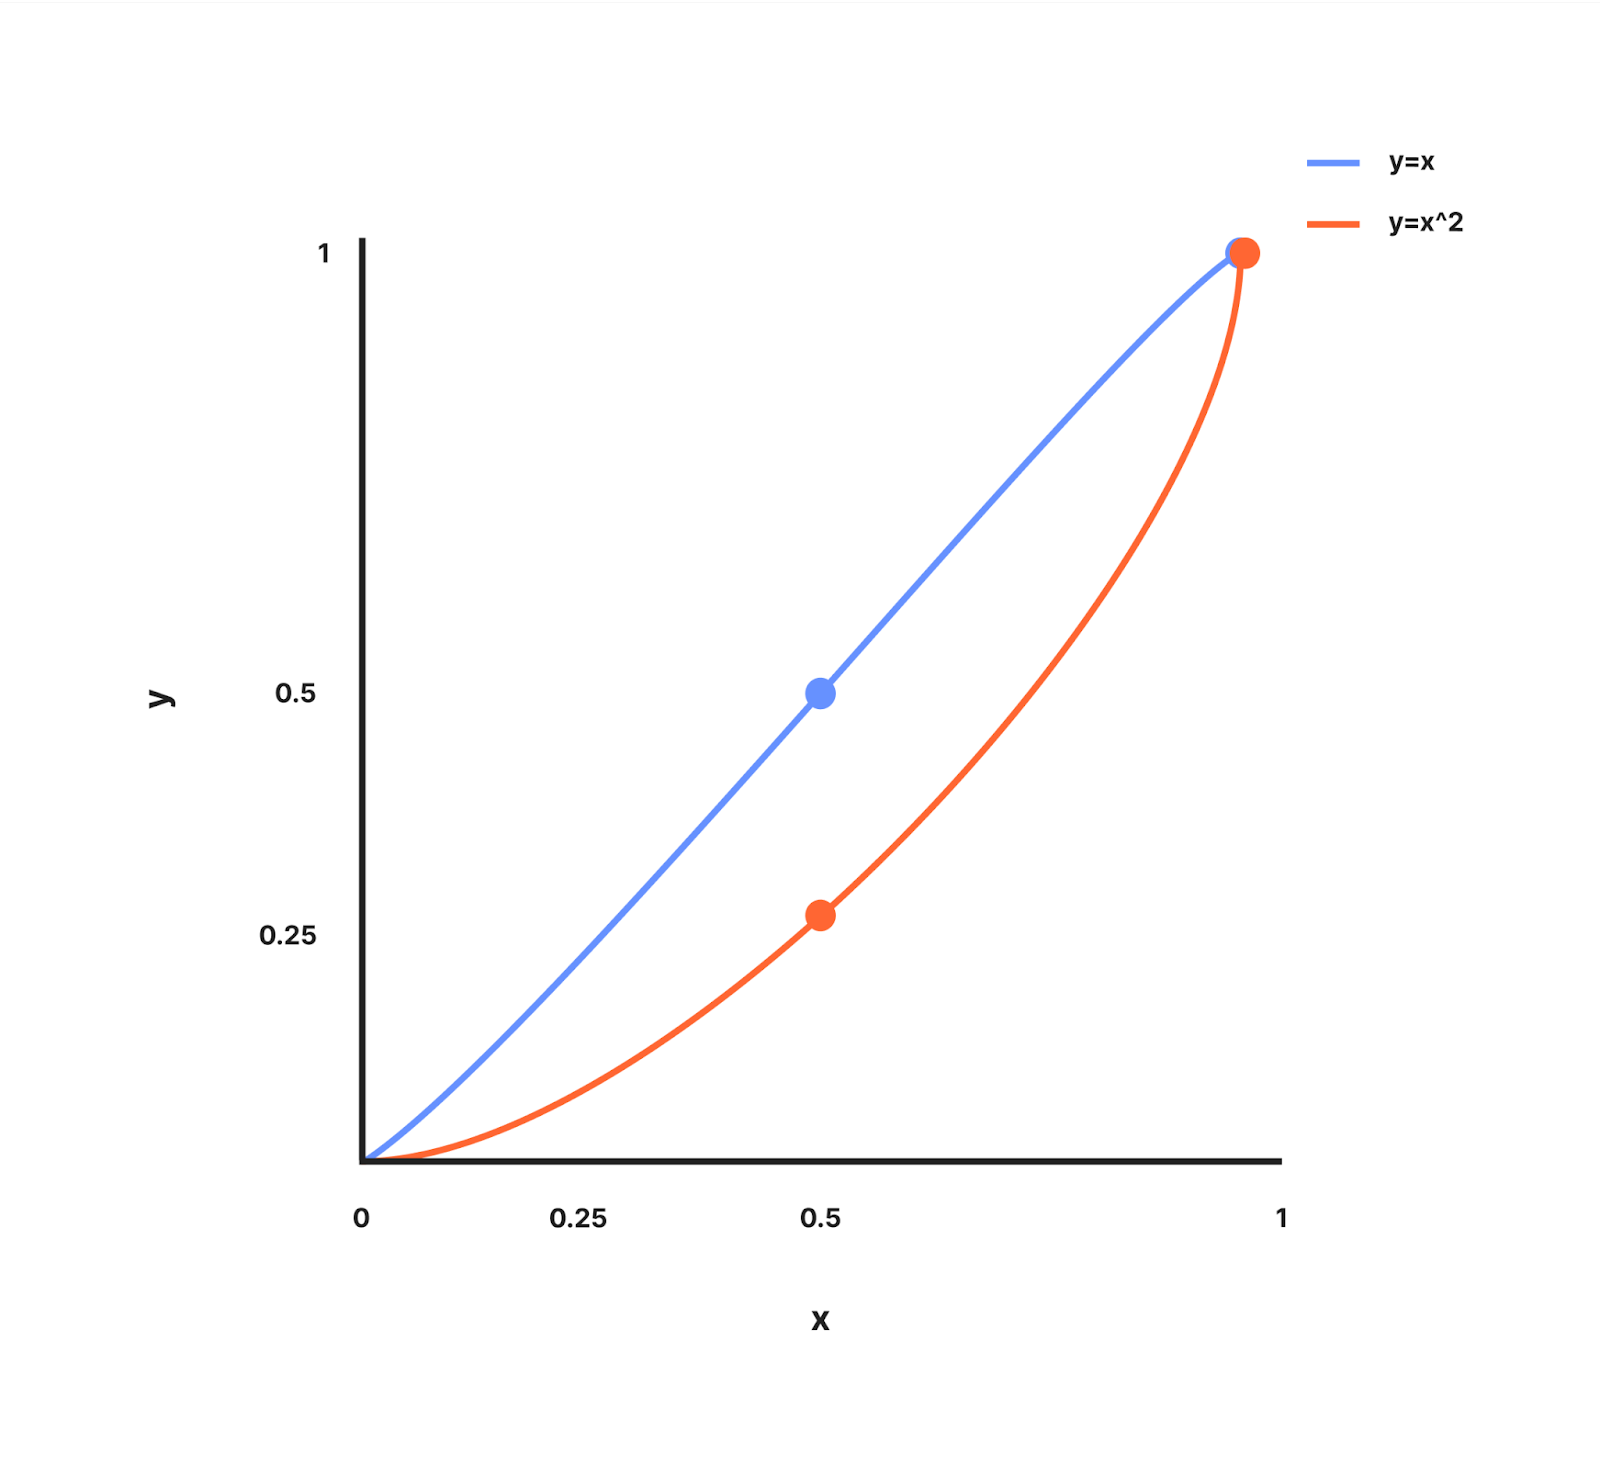 Graph for y=x^curveFactor